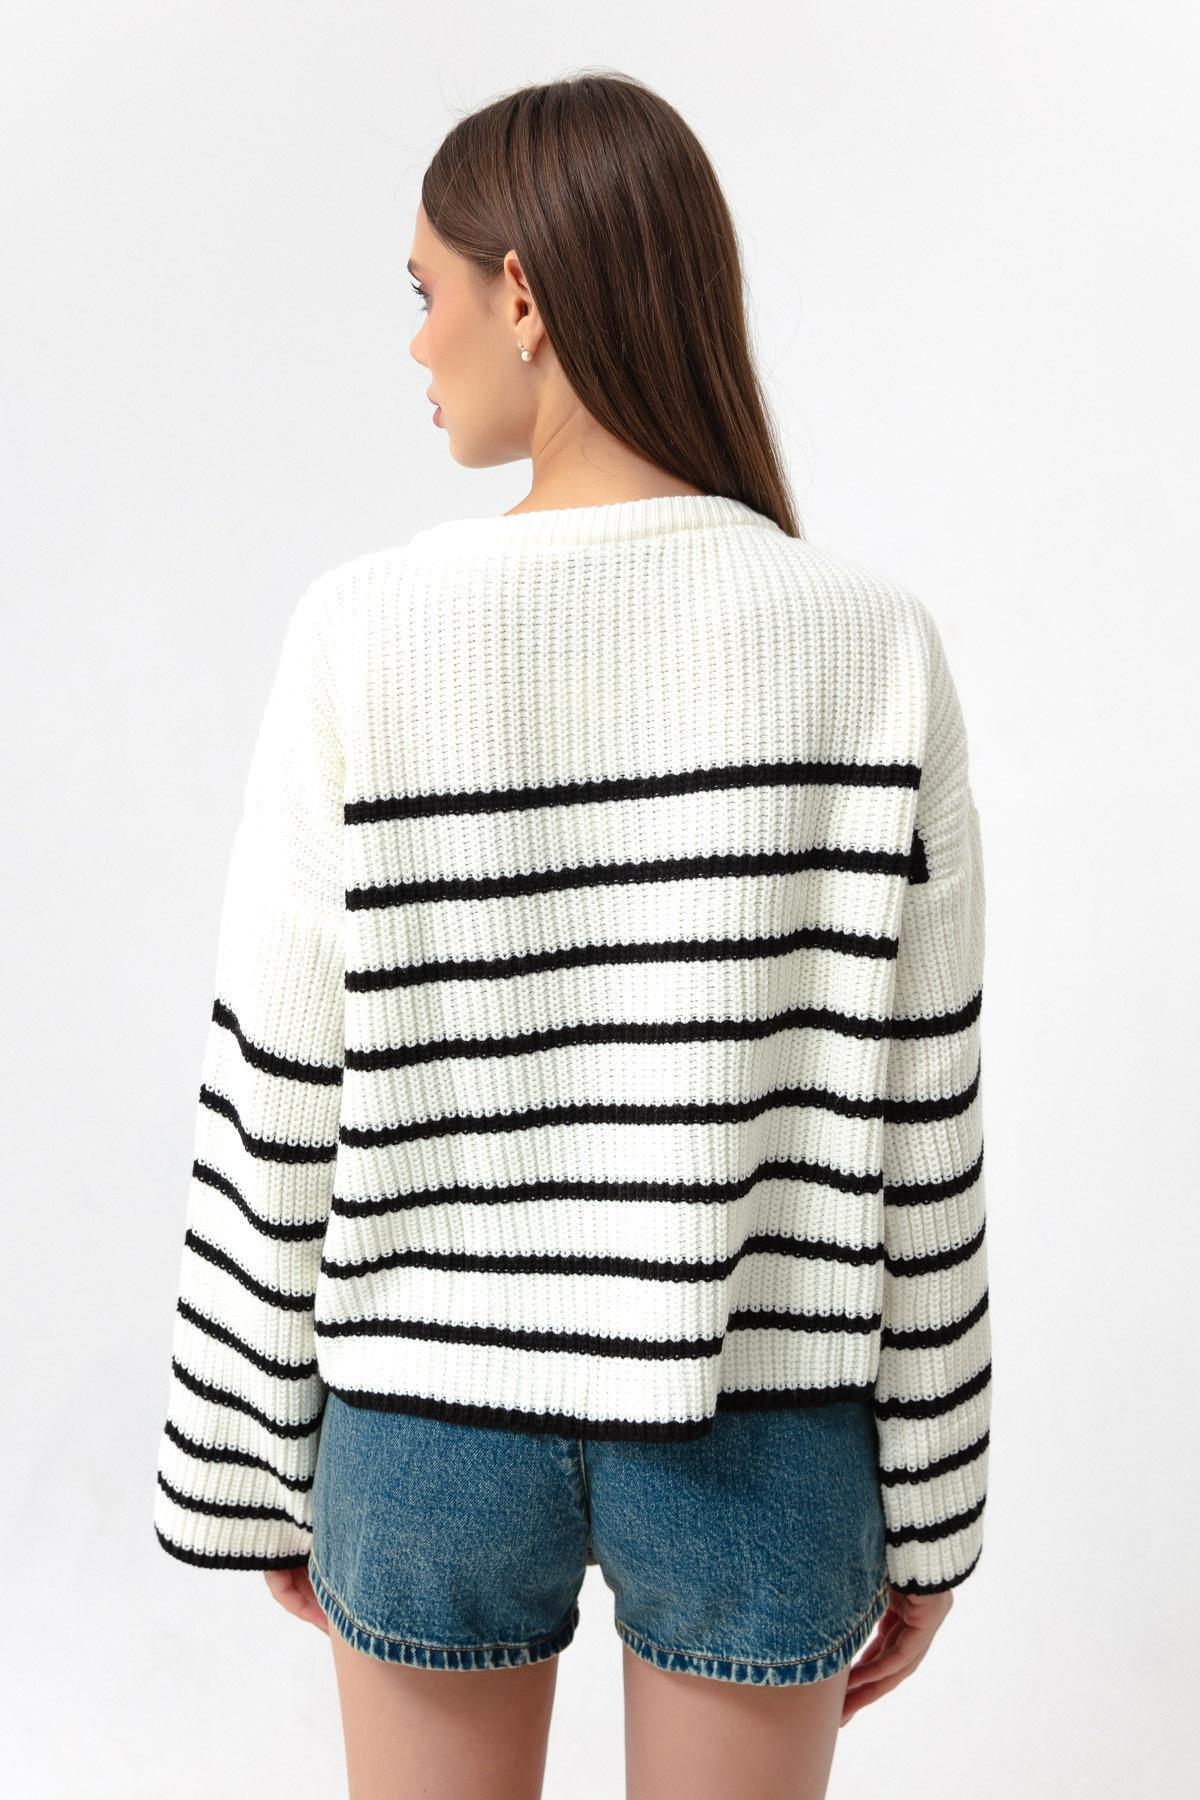 Lafaba - White Striped Gold Button Detailed Knitwear Sweater